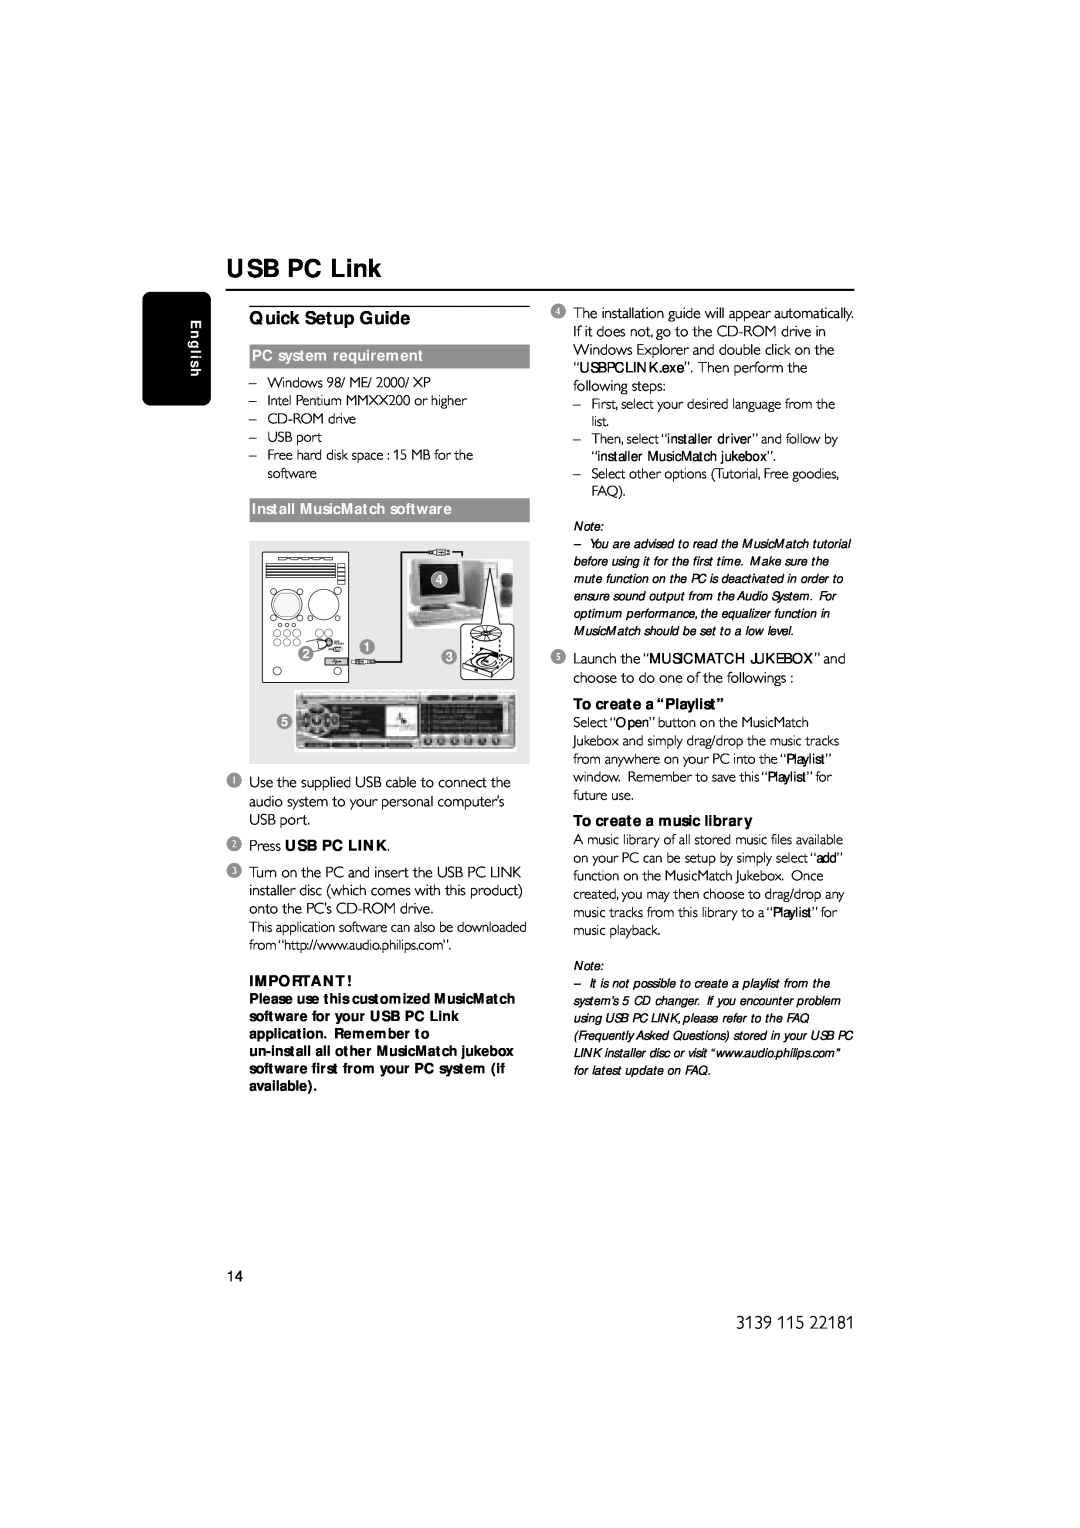 Philips MC-M570/37 USB PC Link, Quick Setup Guide, E n g l i s h, PC system requirement, Install MusicMatch software 